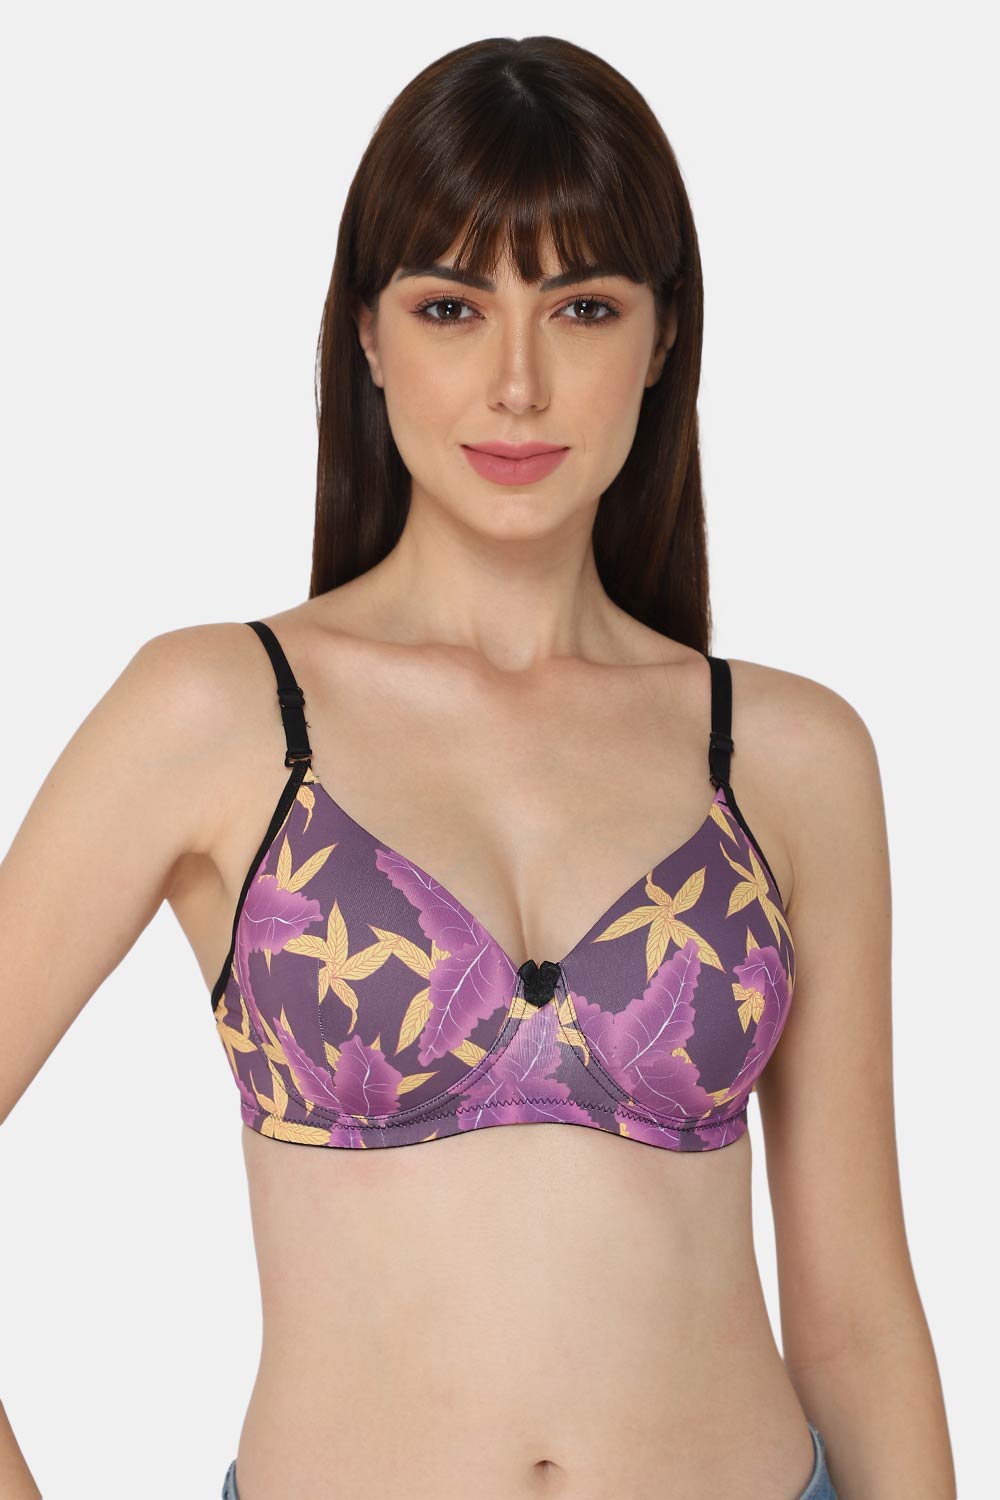 Buy Maroon Red Cotton Wirefree Padded Women Bra Online at Low